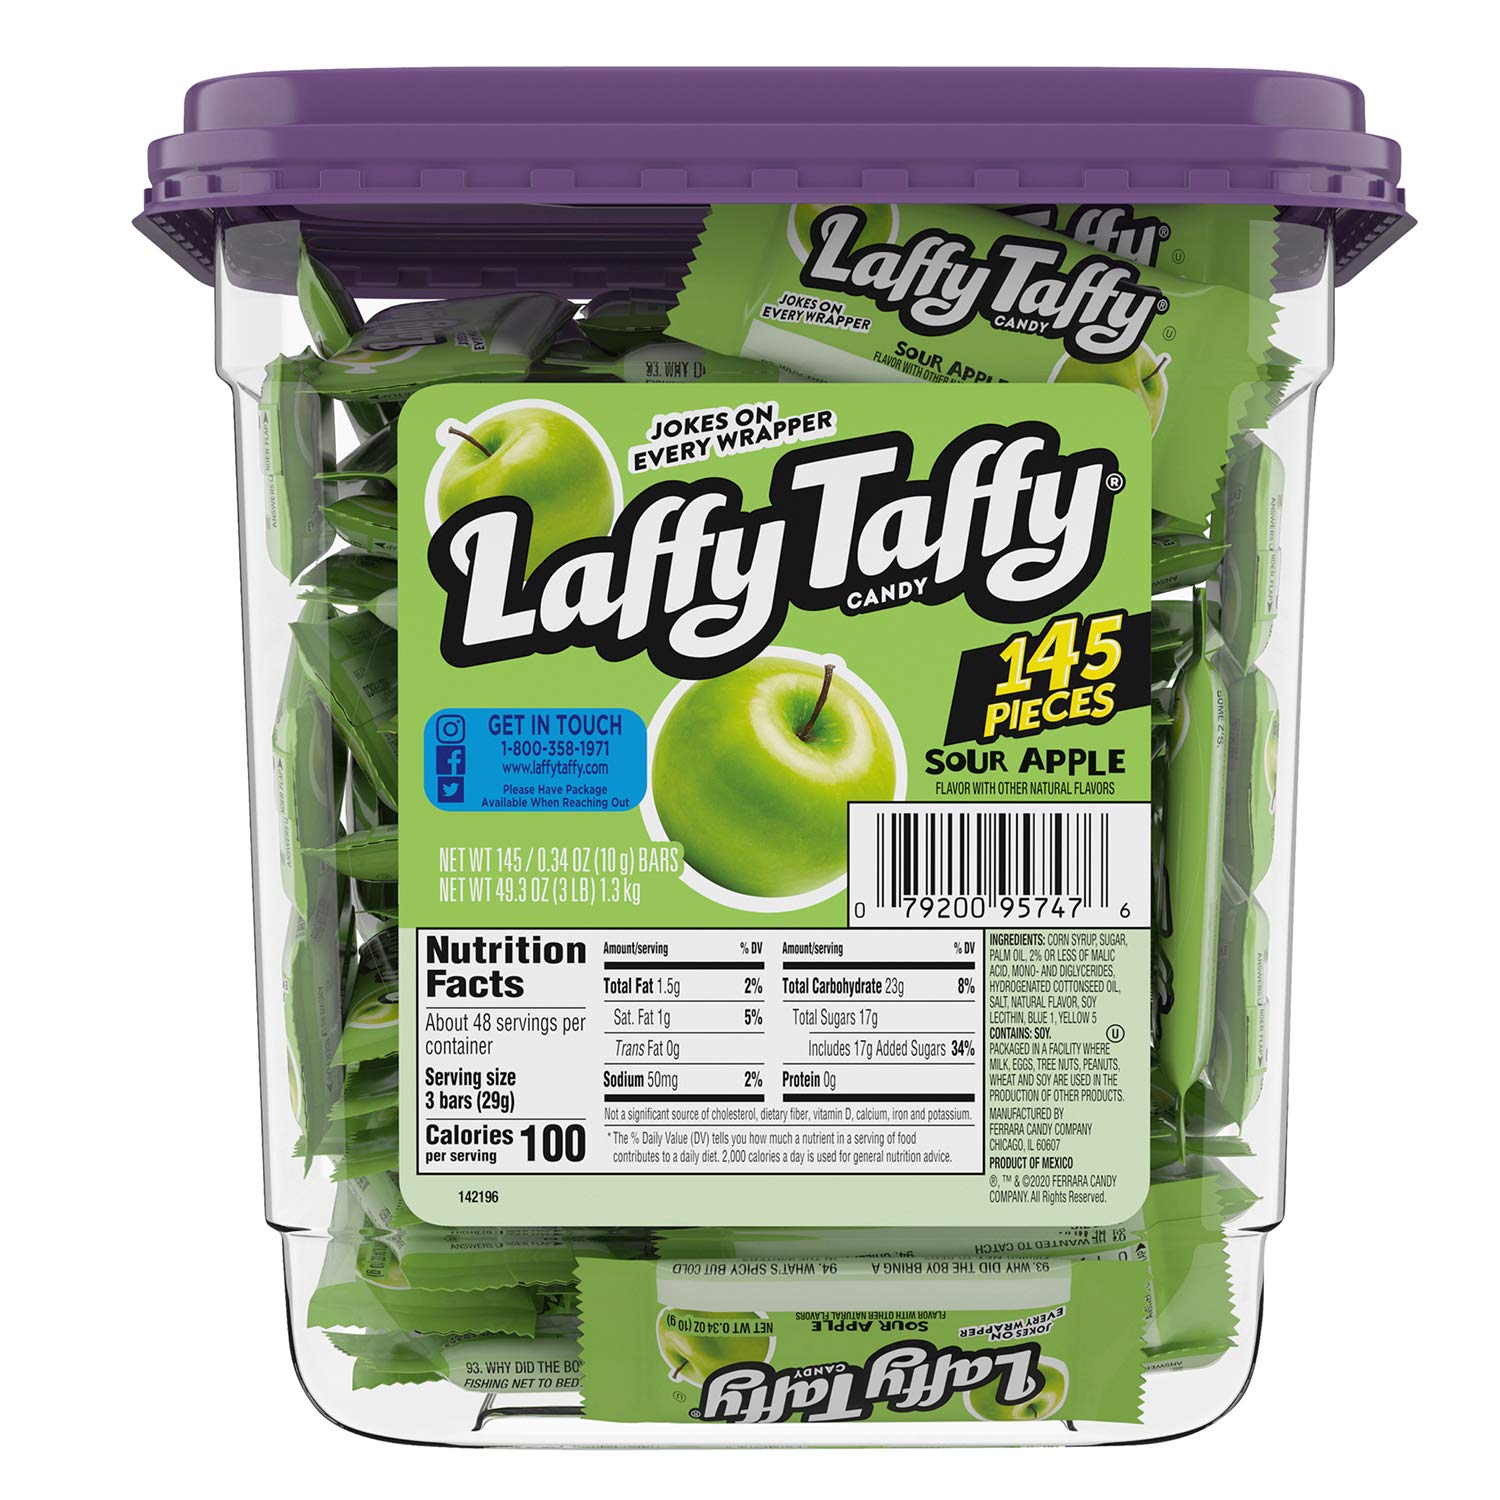 Laffy Taffy Candy, Sour Apple Flavor, 145 Pieces - (3 lbs.) - $9.58 or less on S+S (AC) (Amazon)